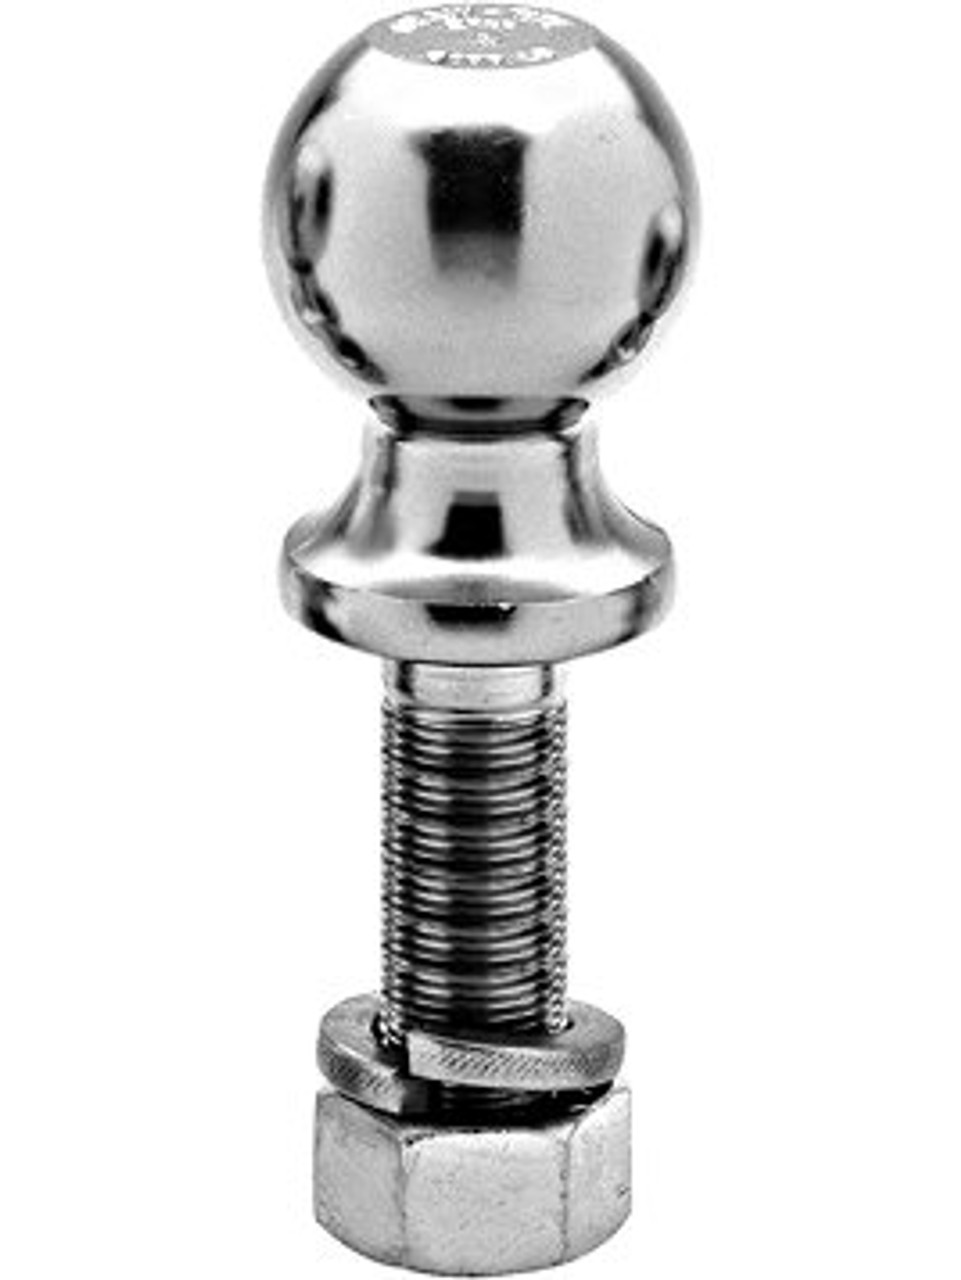 4974 --- 2" Hitch Ball with long shank, 3,500 lb Capacity, Chrome Finish